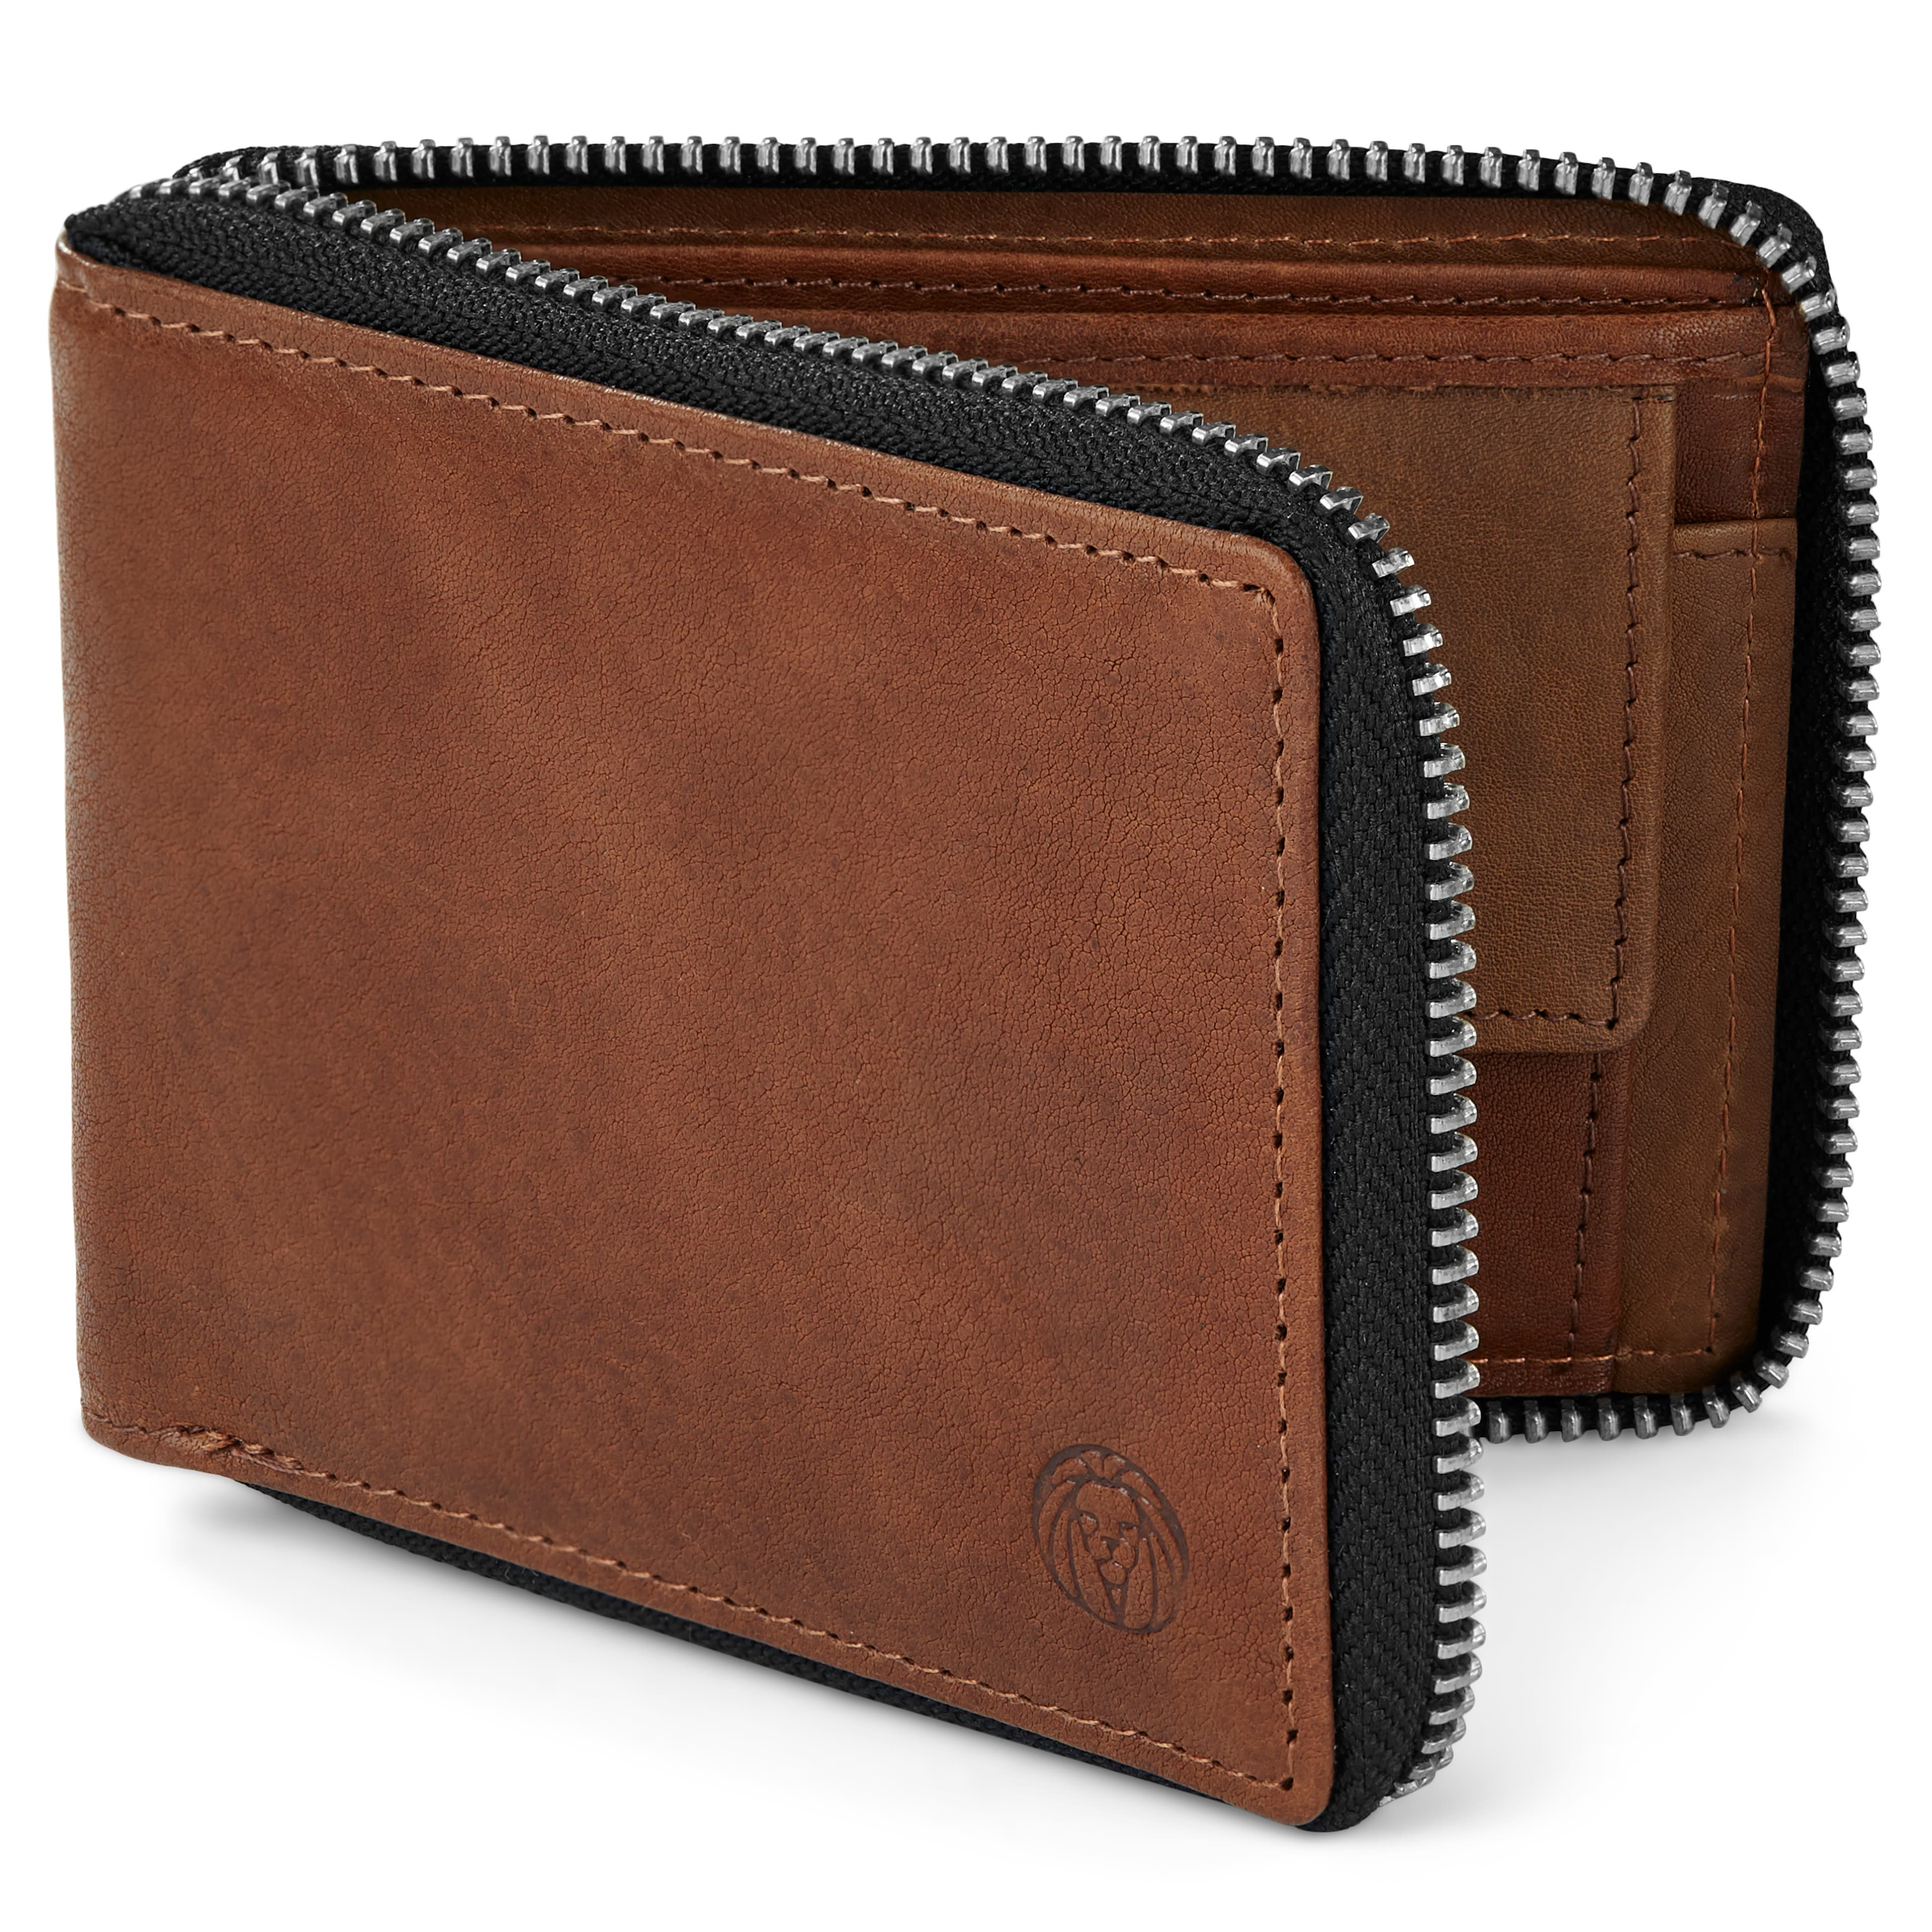 Cambodia Zip-Lined Tan RFID Leather Wallet